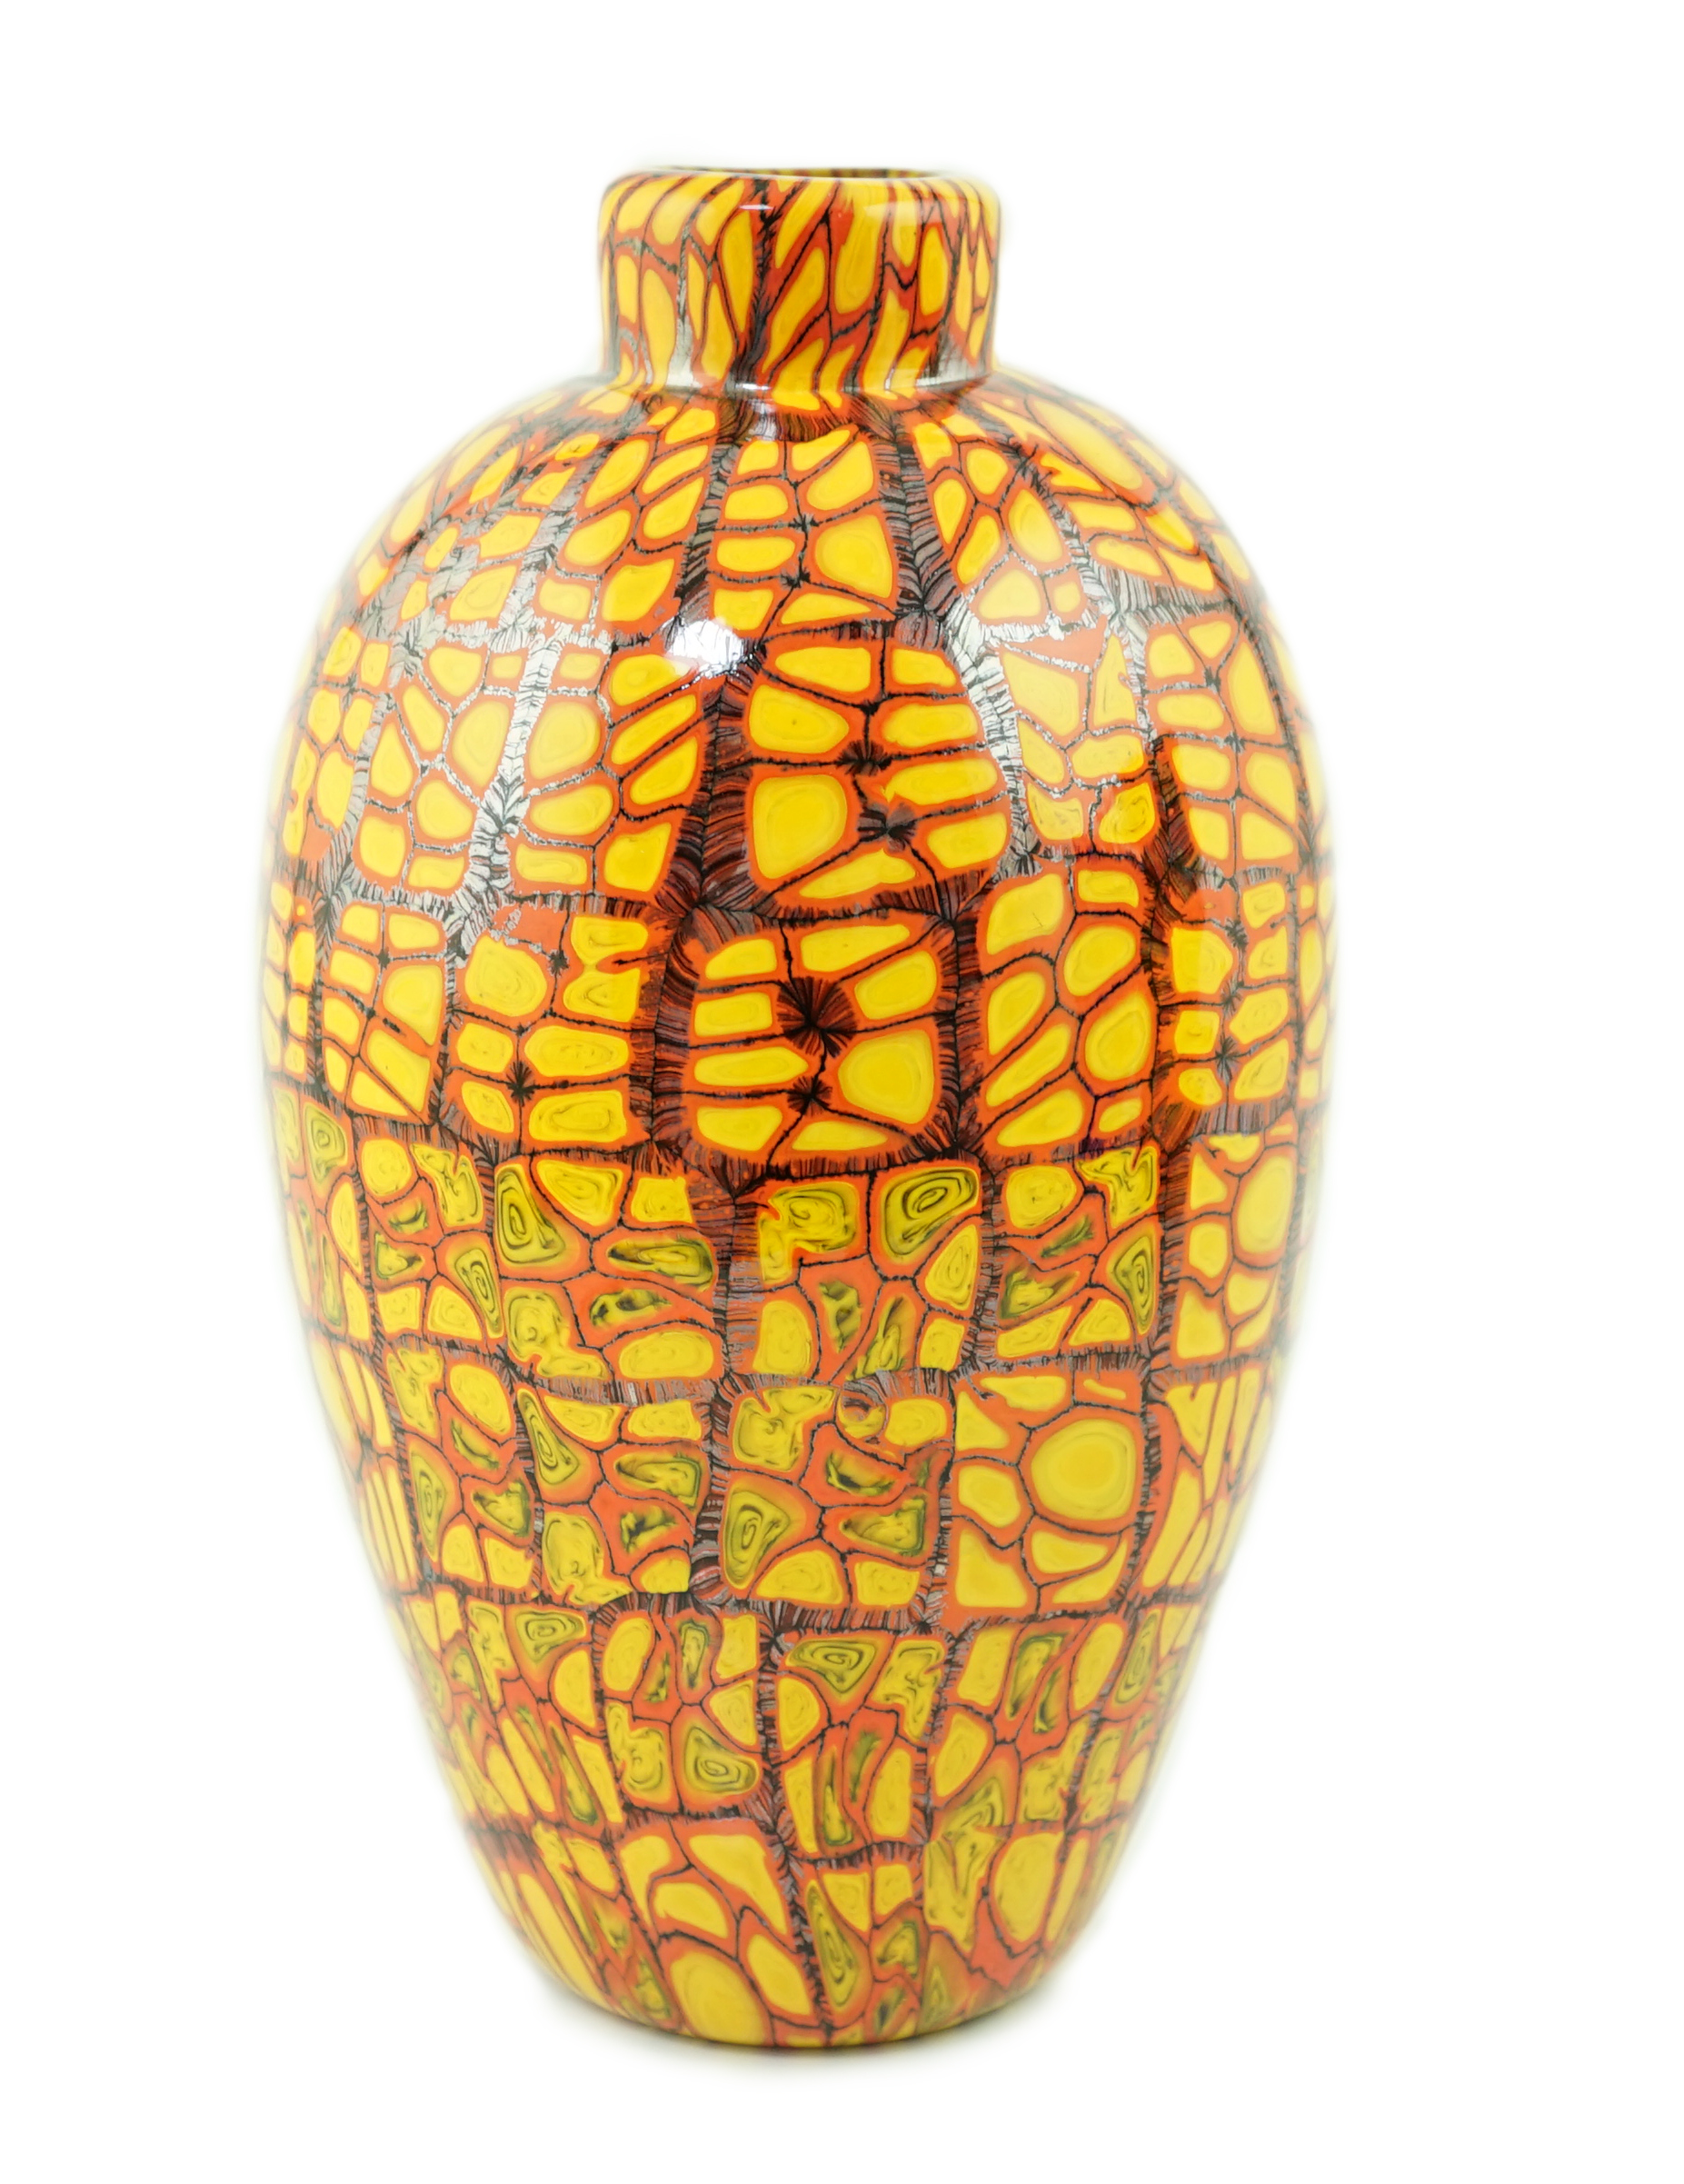 Vittorio Ferro (1932-2012) A Murano glass Murrine vase, in orange, red and black, signed, 26cm, Please note this lot attracts an additional import tax of 20% on the hammer price